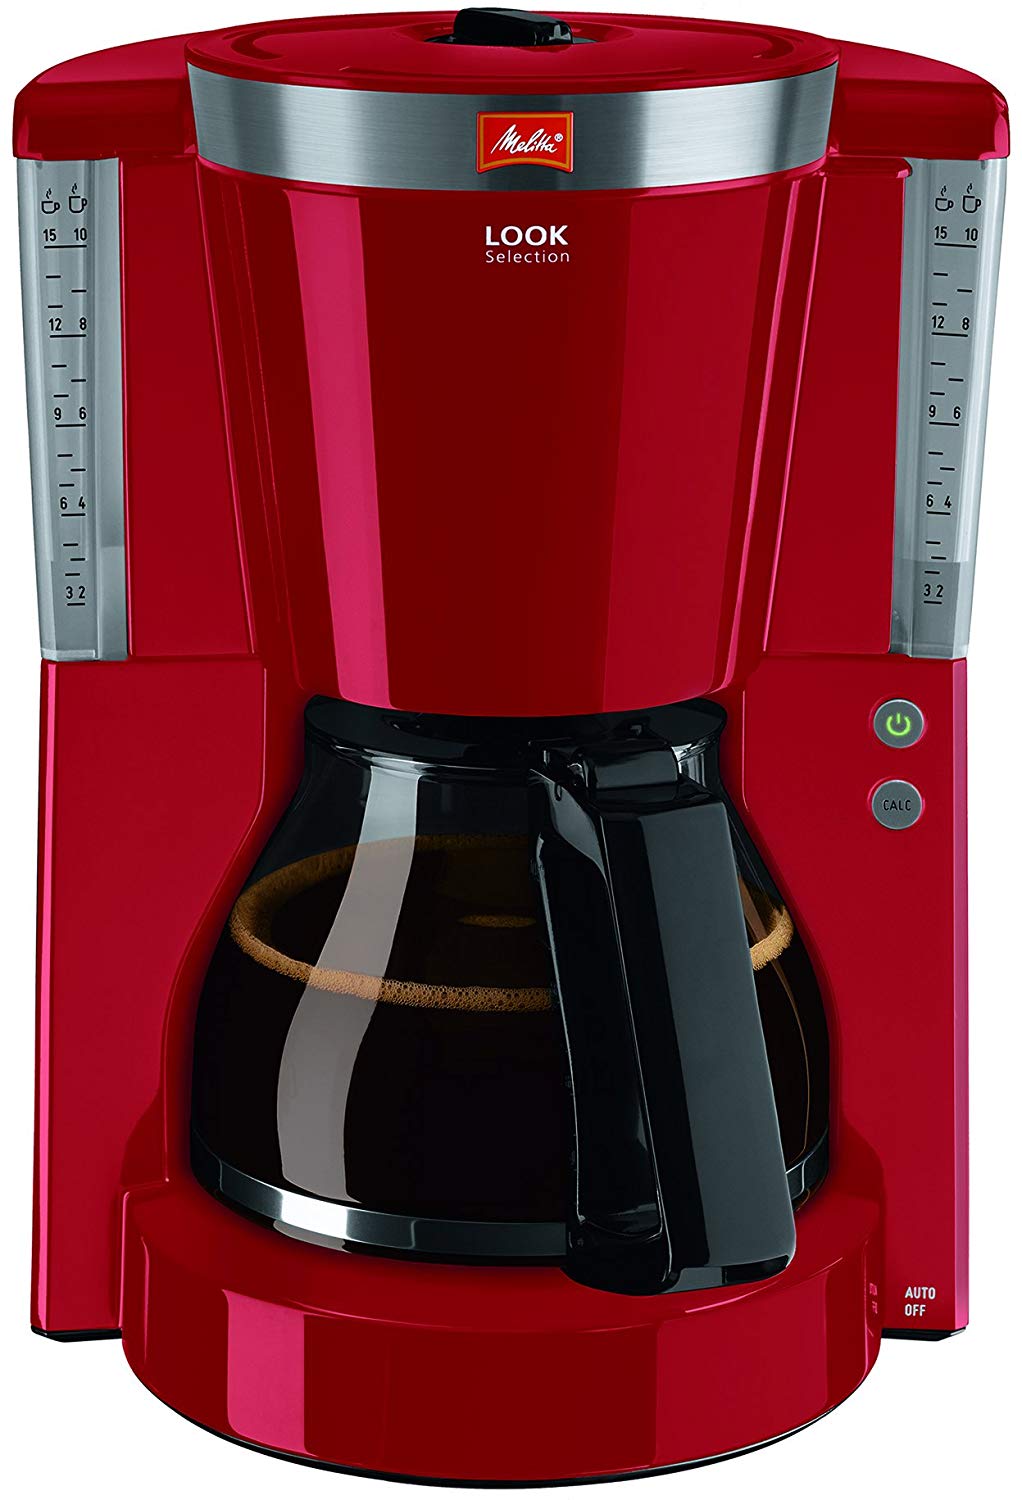 Melitta 1011 Look Iv Selection Coffee Filter Machine, Red